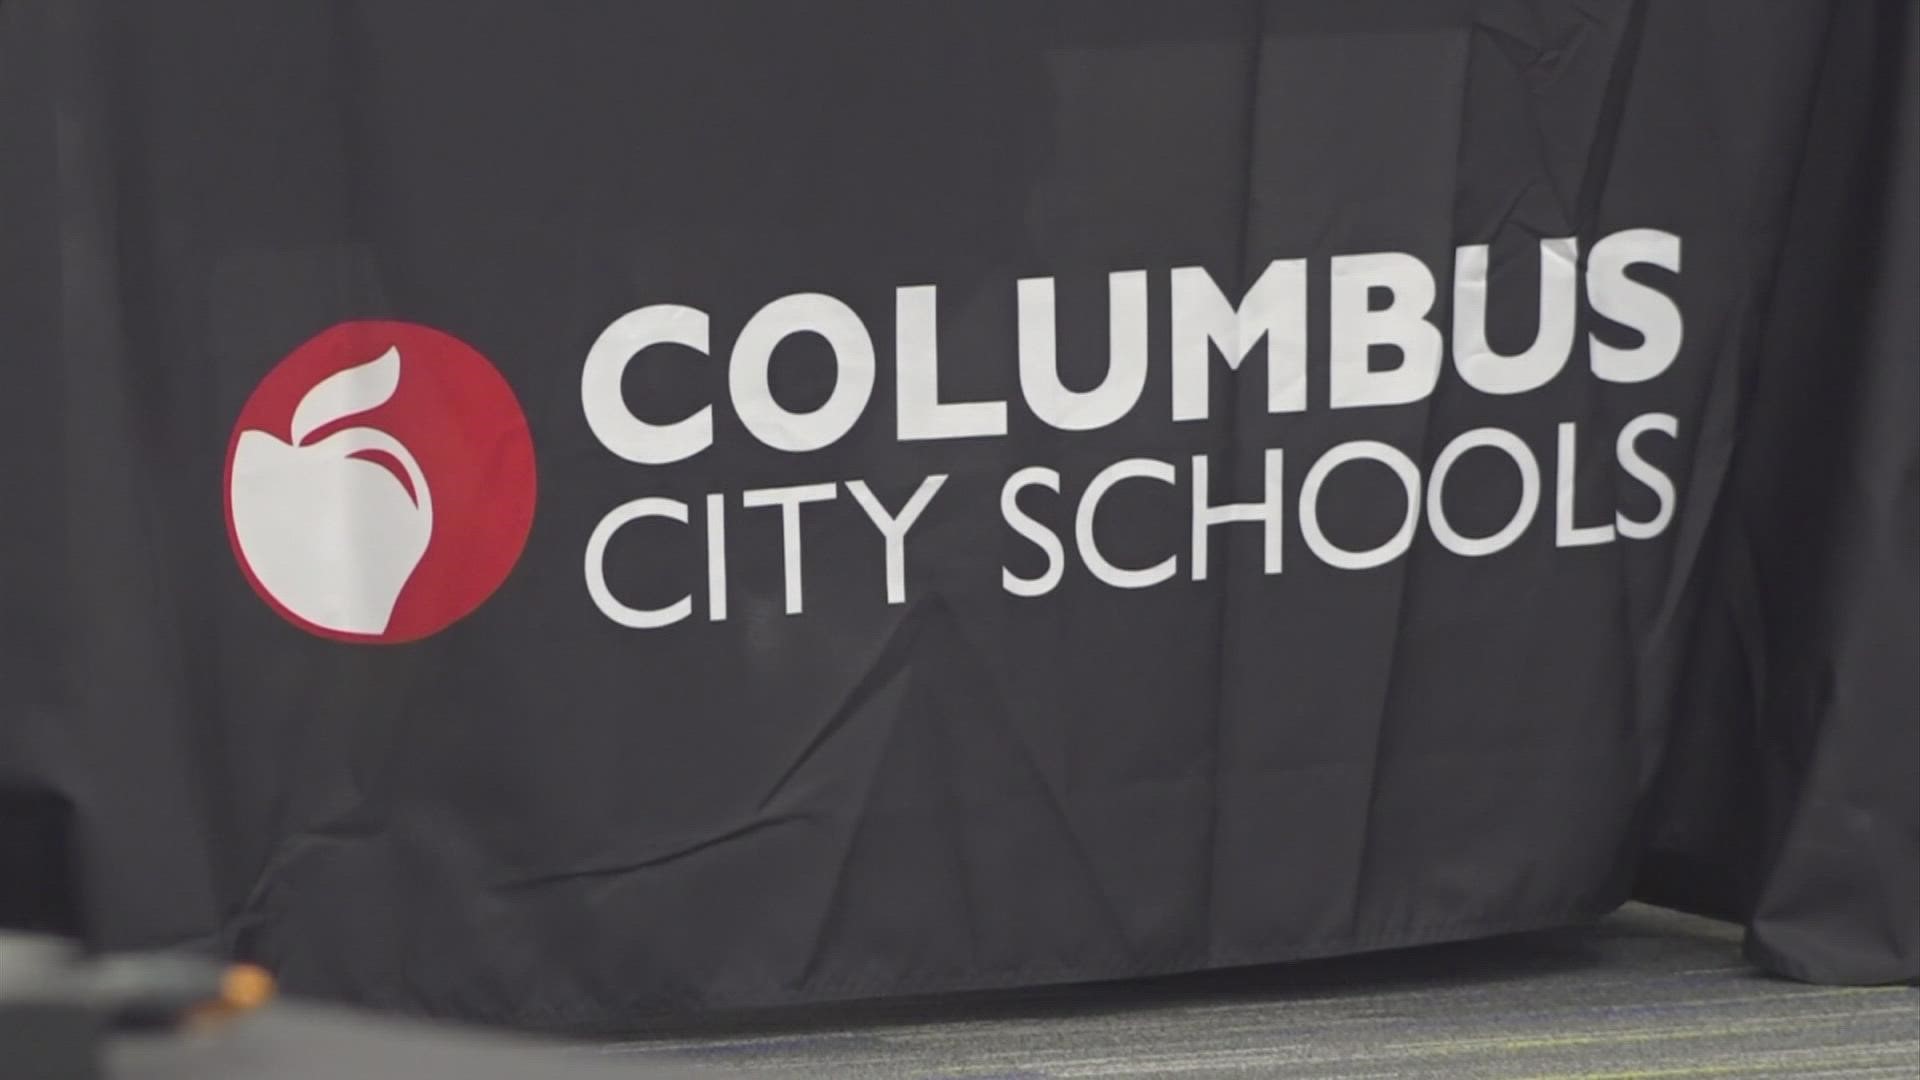 Starting on March 8, students and staff at Columbus City Schools will not be required to wear a mask.